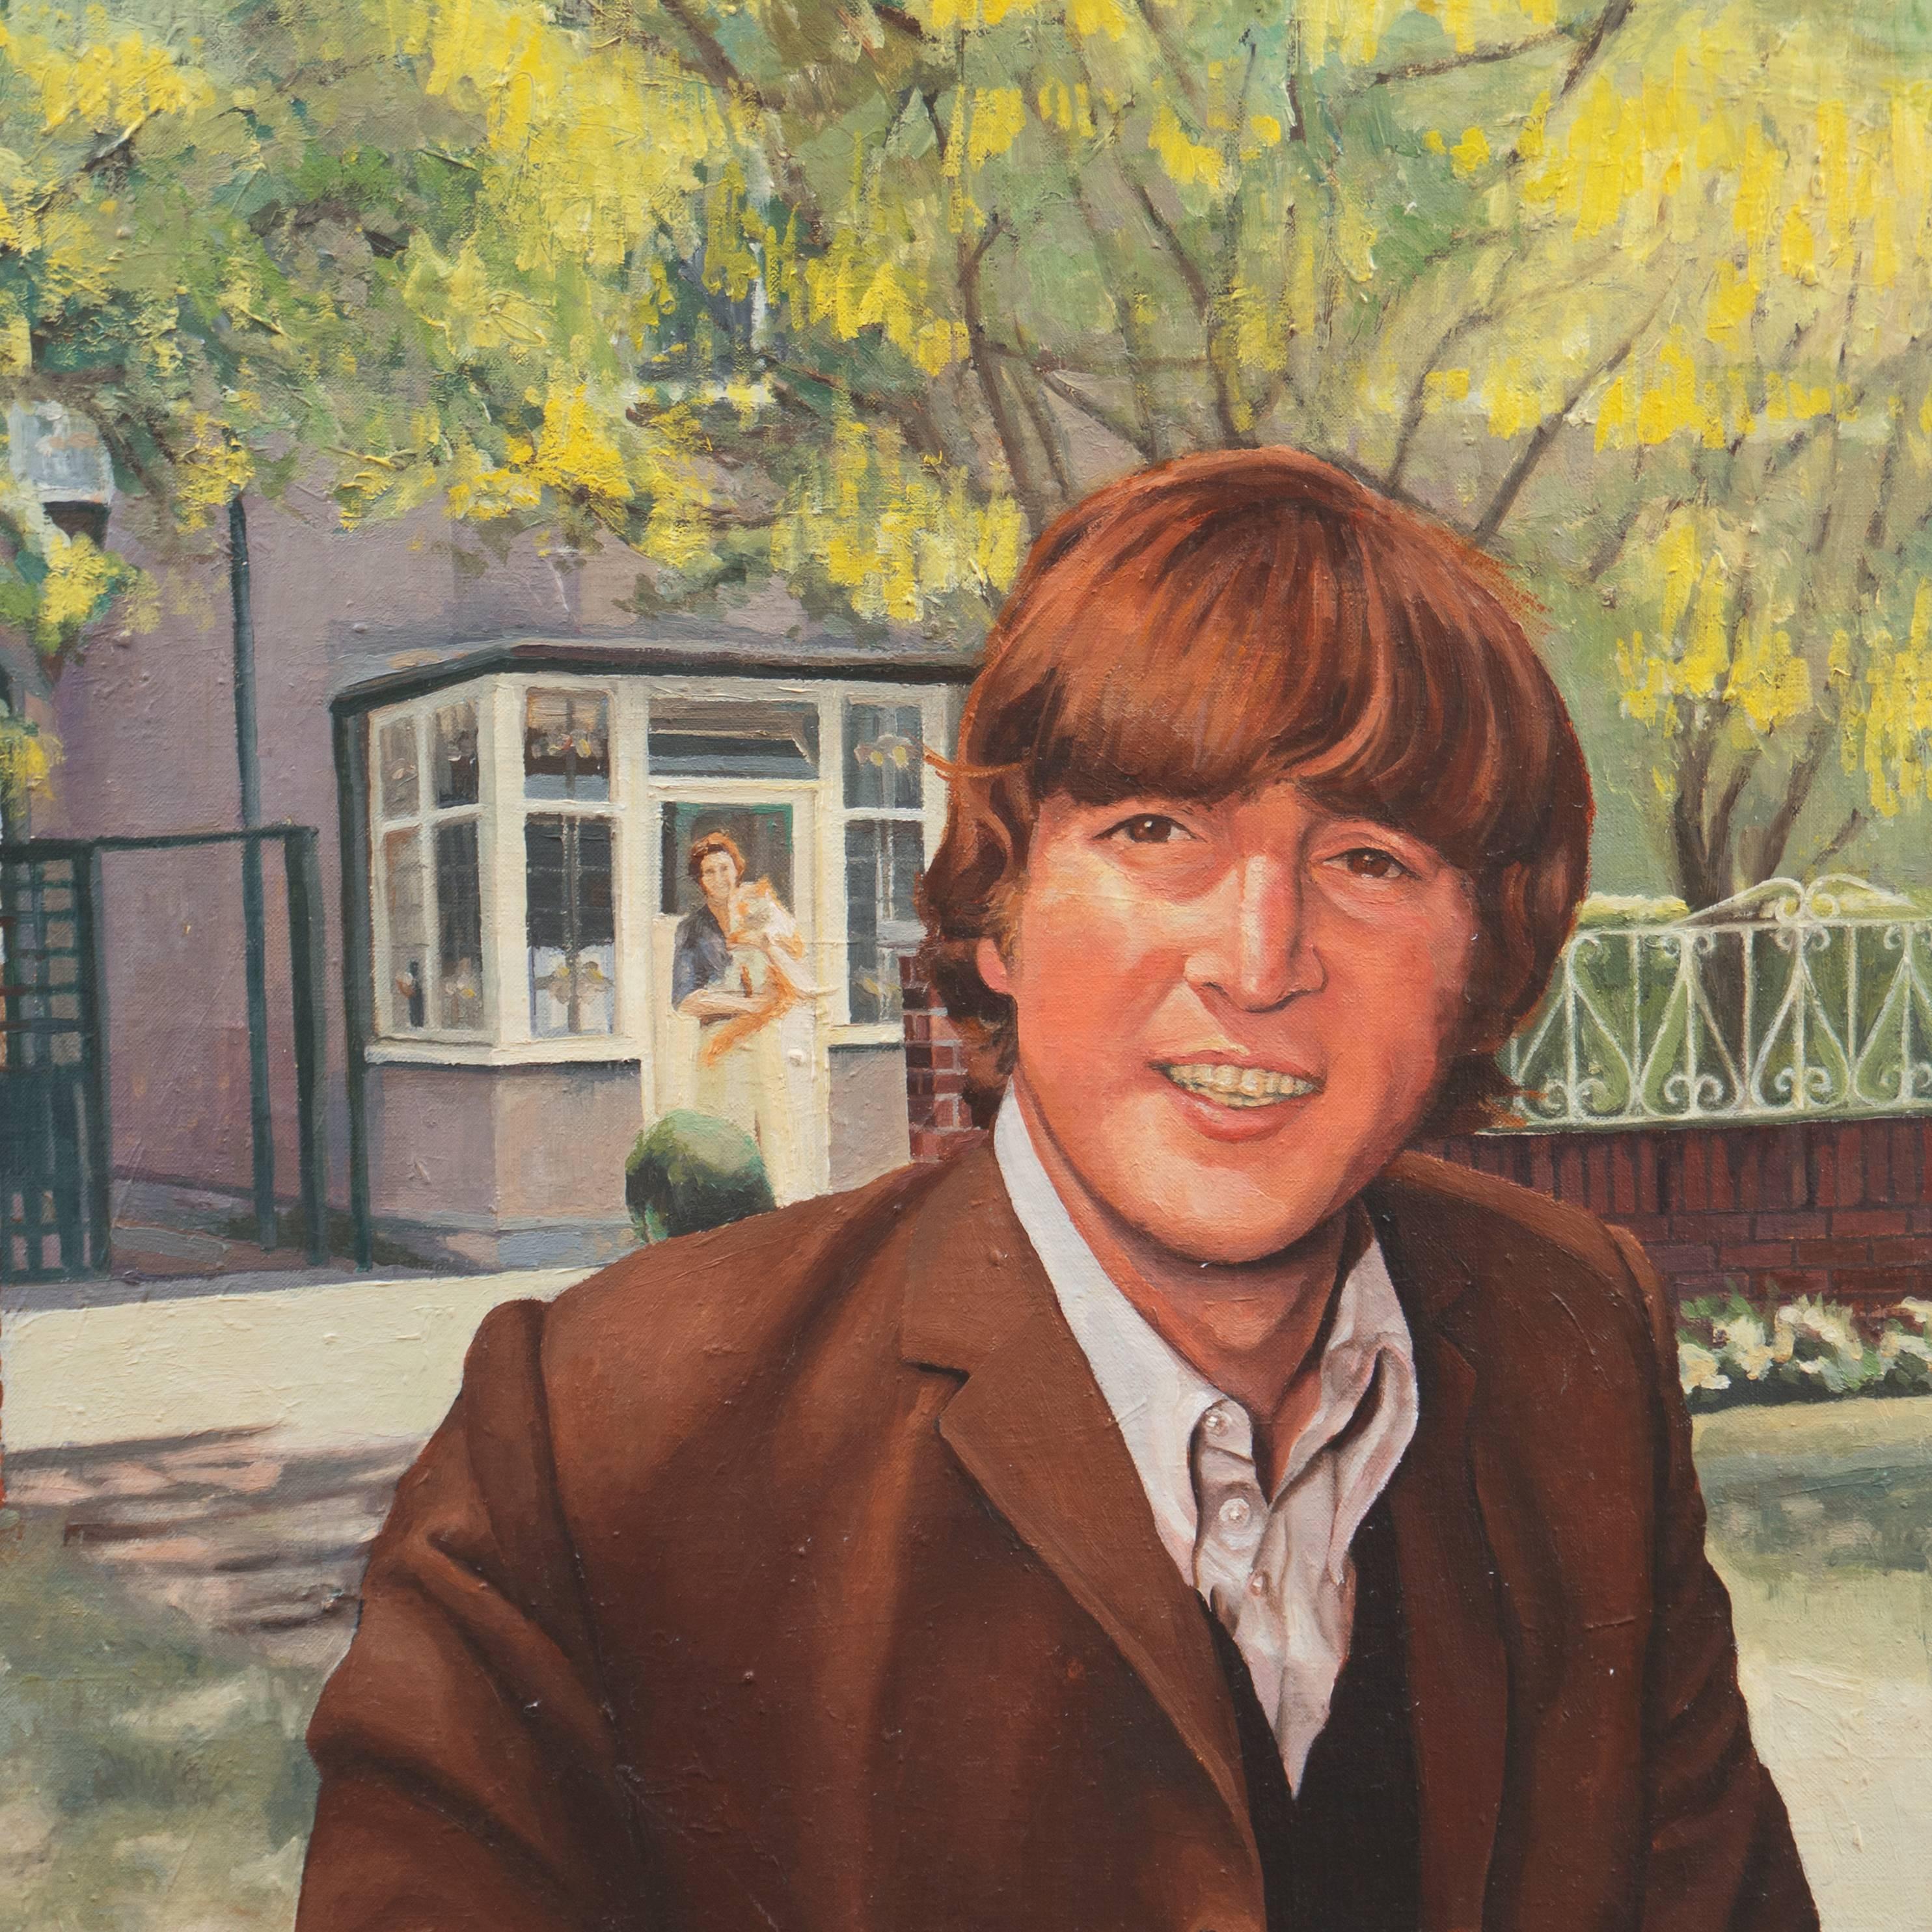 « John and Mimi with Tim », John Lennon, Angleterre, Manchester College of Art - Impressionnisme Painting par Stephen Bower